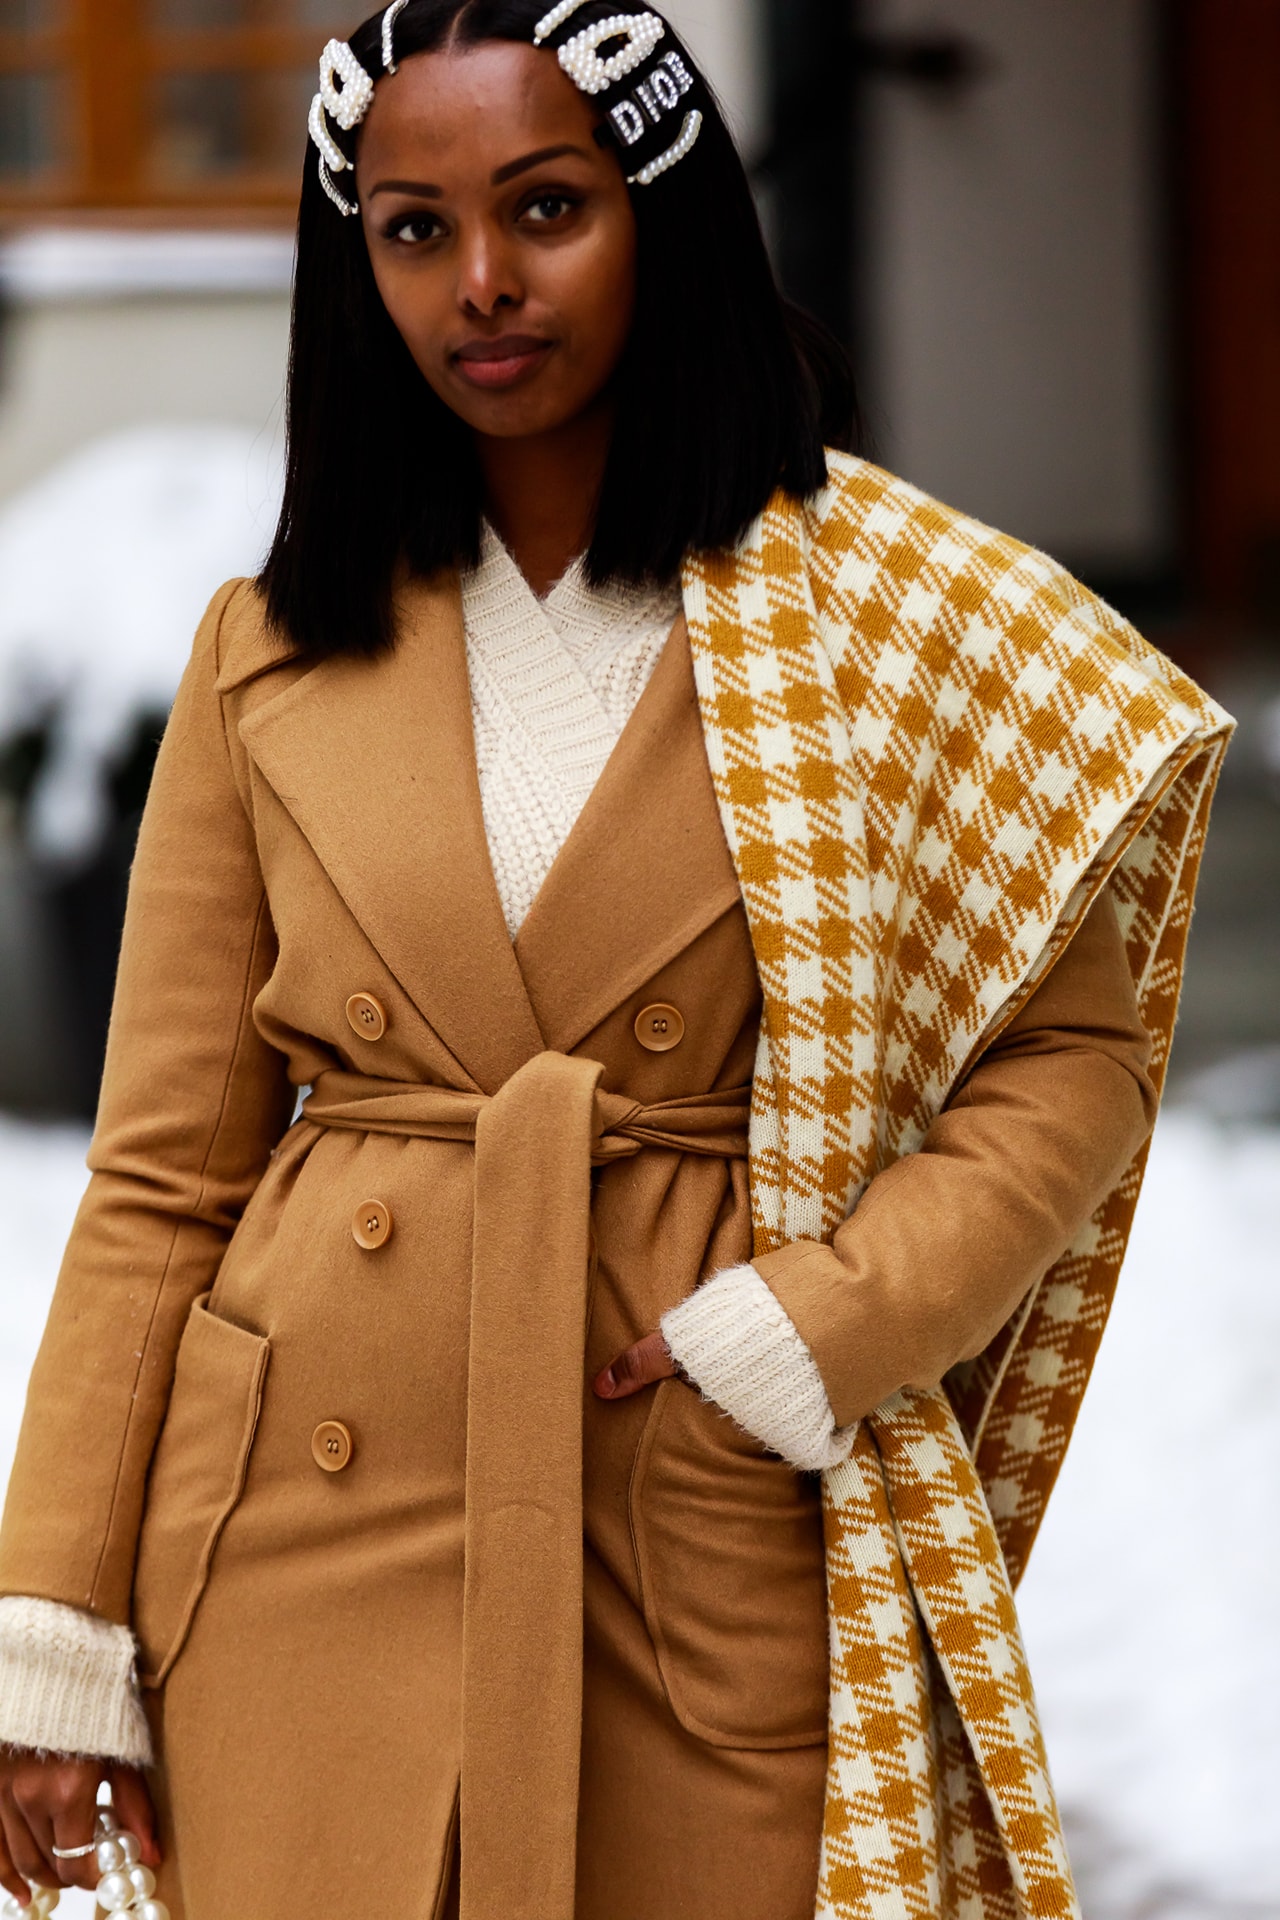 stockholm fashion week street style blogger influencer coat scarf hair clips pearl